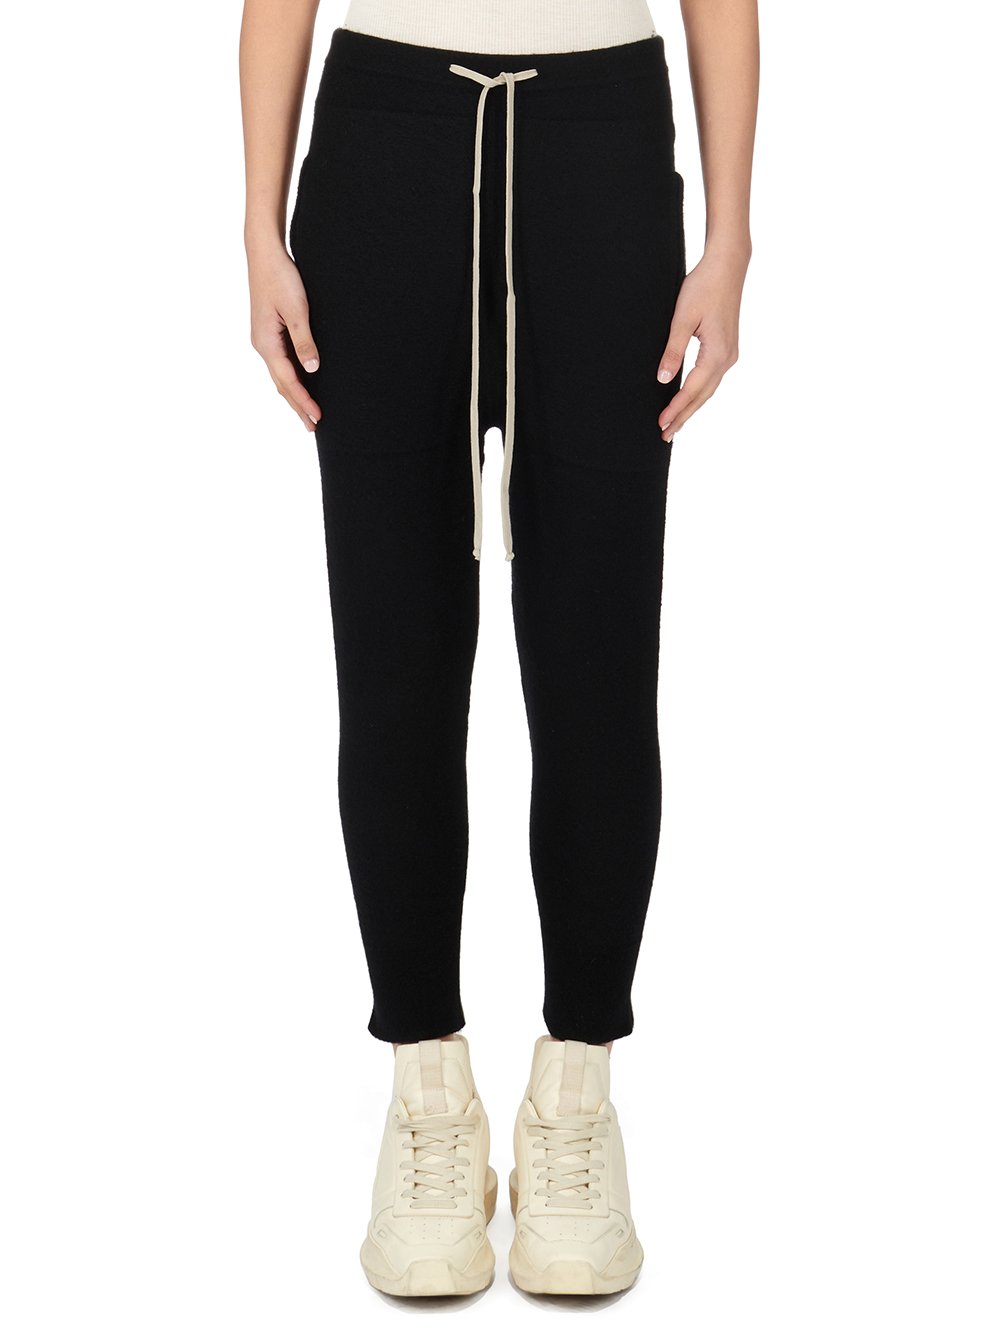 RICK OWENS FW23 LUXOR TRACK PANTS IN BLACK BOILED CASHMERE KNIT